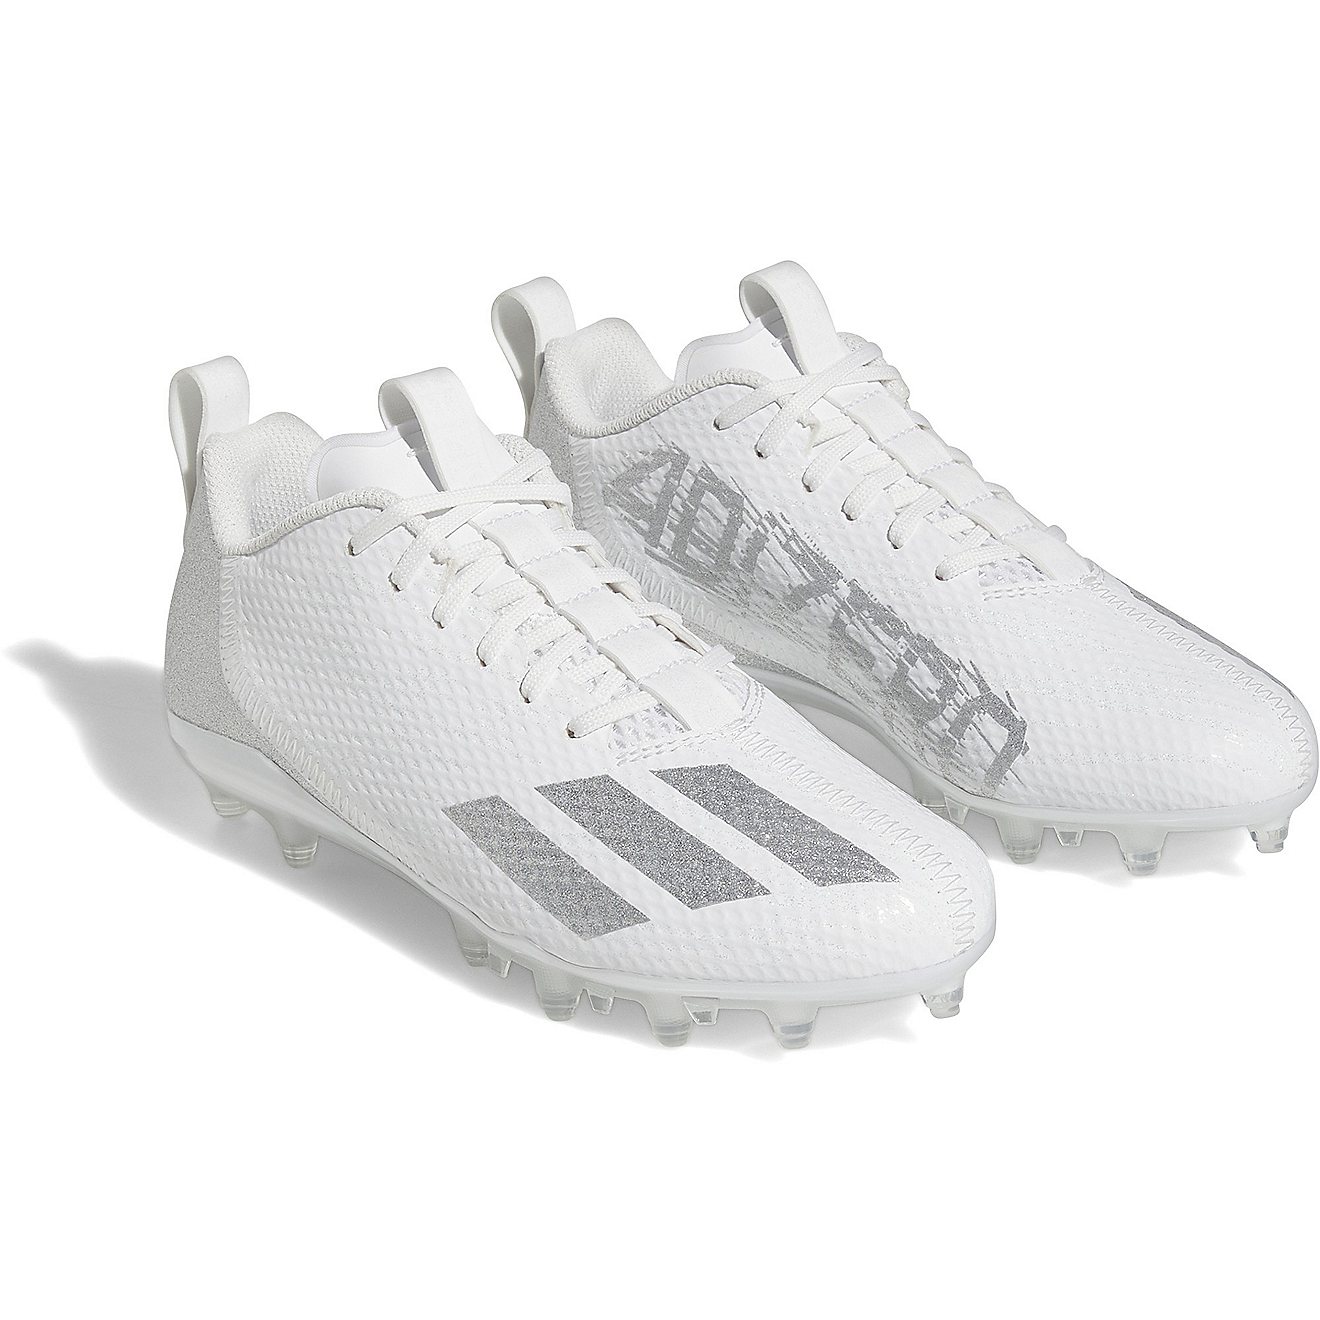 adidas Youth adizero Spark Football Cleats                                                                                       - view number 3